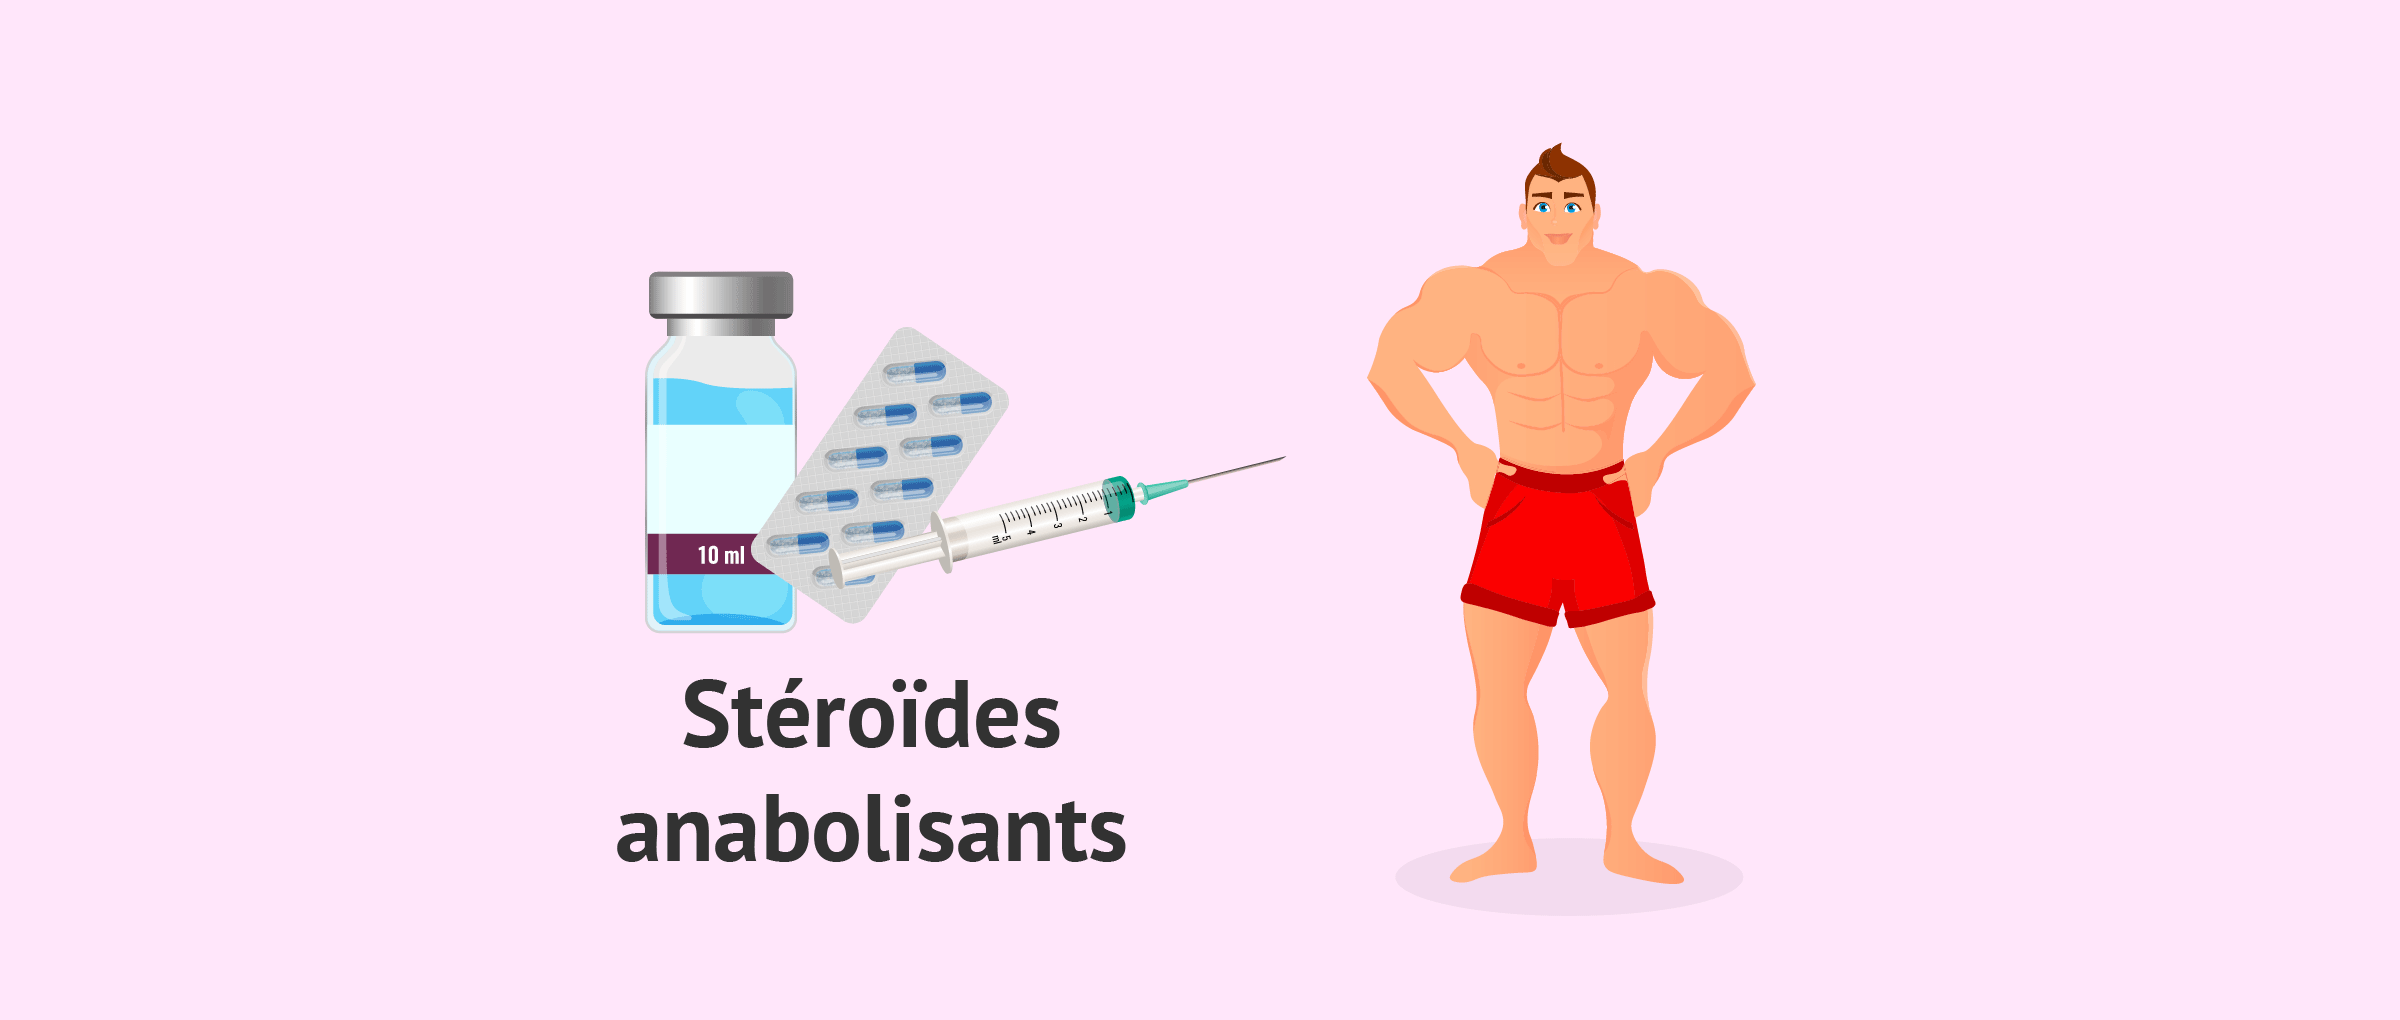 How To Make Your Product Stand Out With steroide anabolisant musculation in 2021